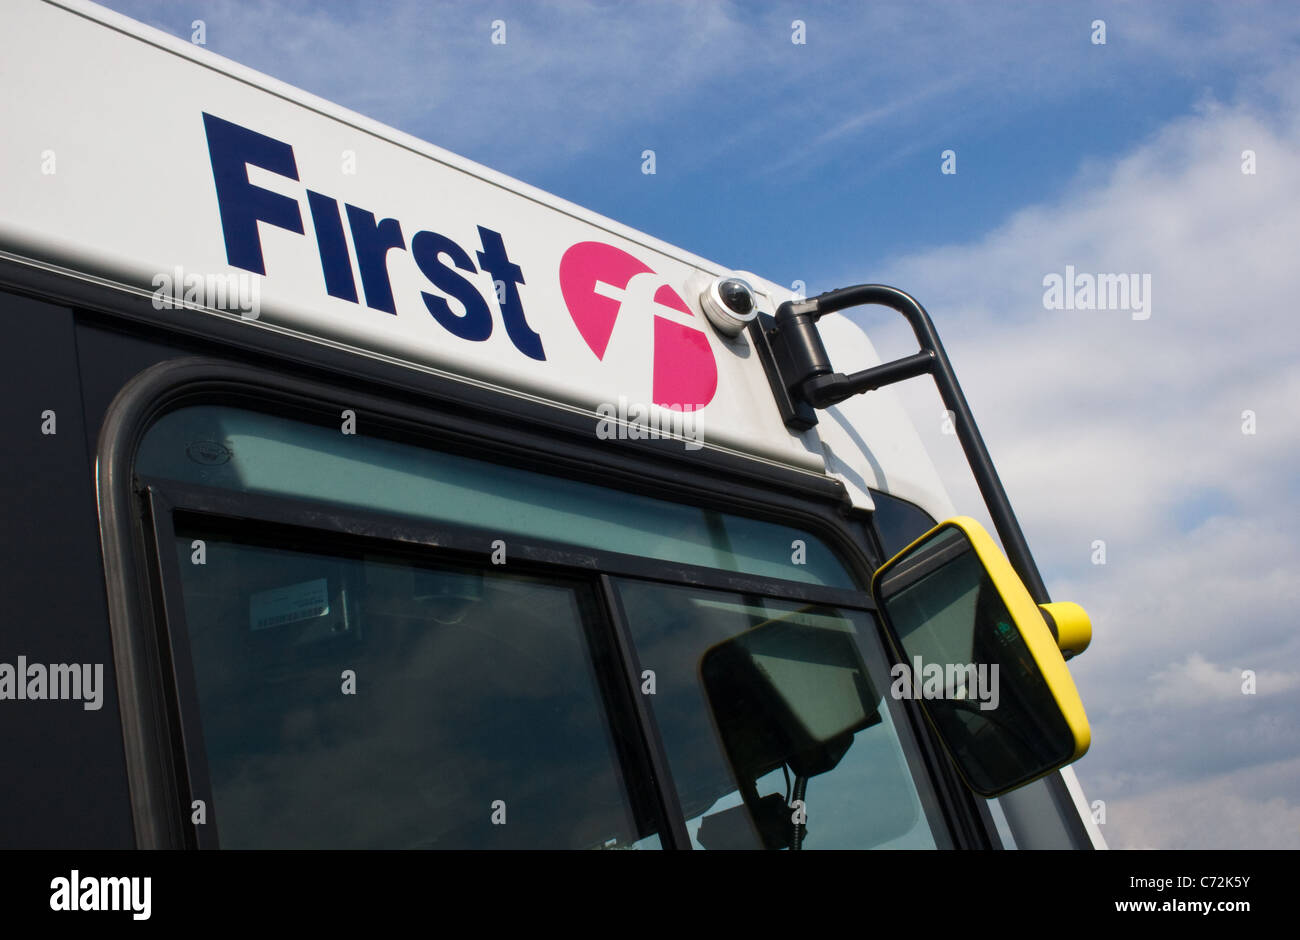 First bus, Manchester, England, UK Stock Photo